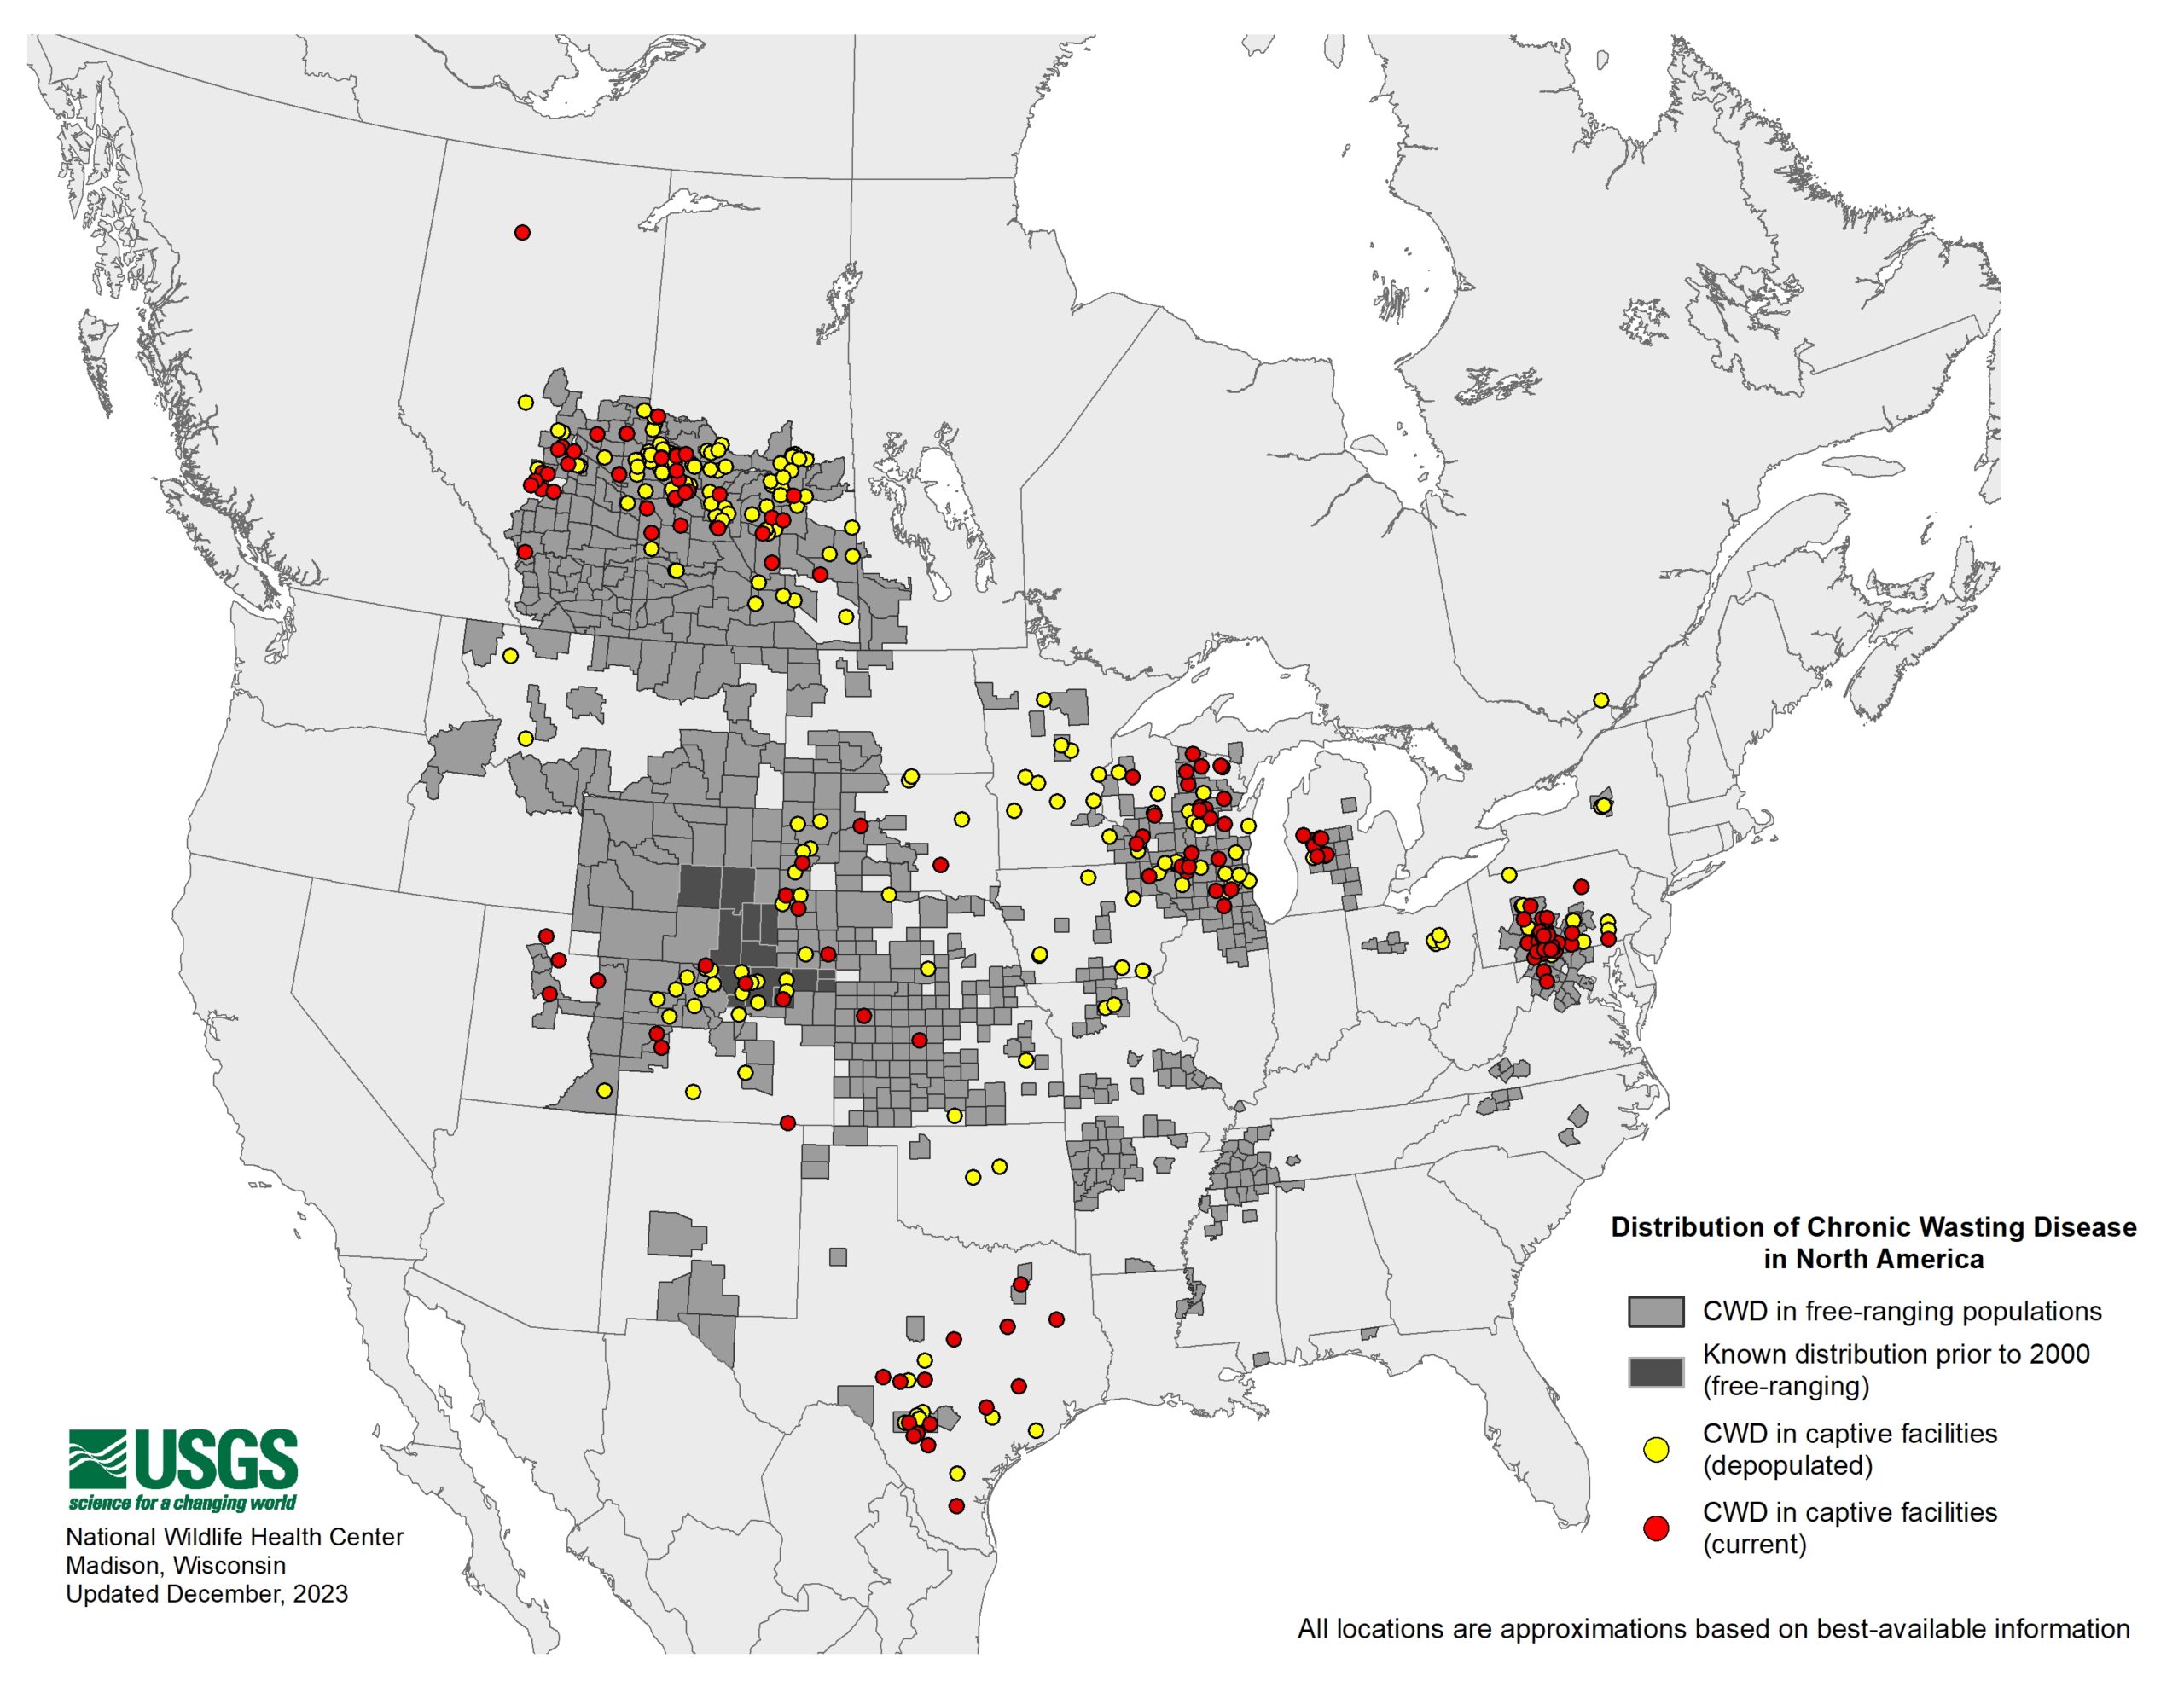 This is a map of North America showing where instances of Chronic Wasting Disease in deer are occurring